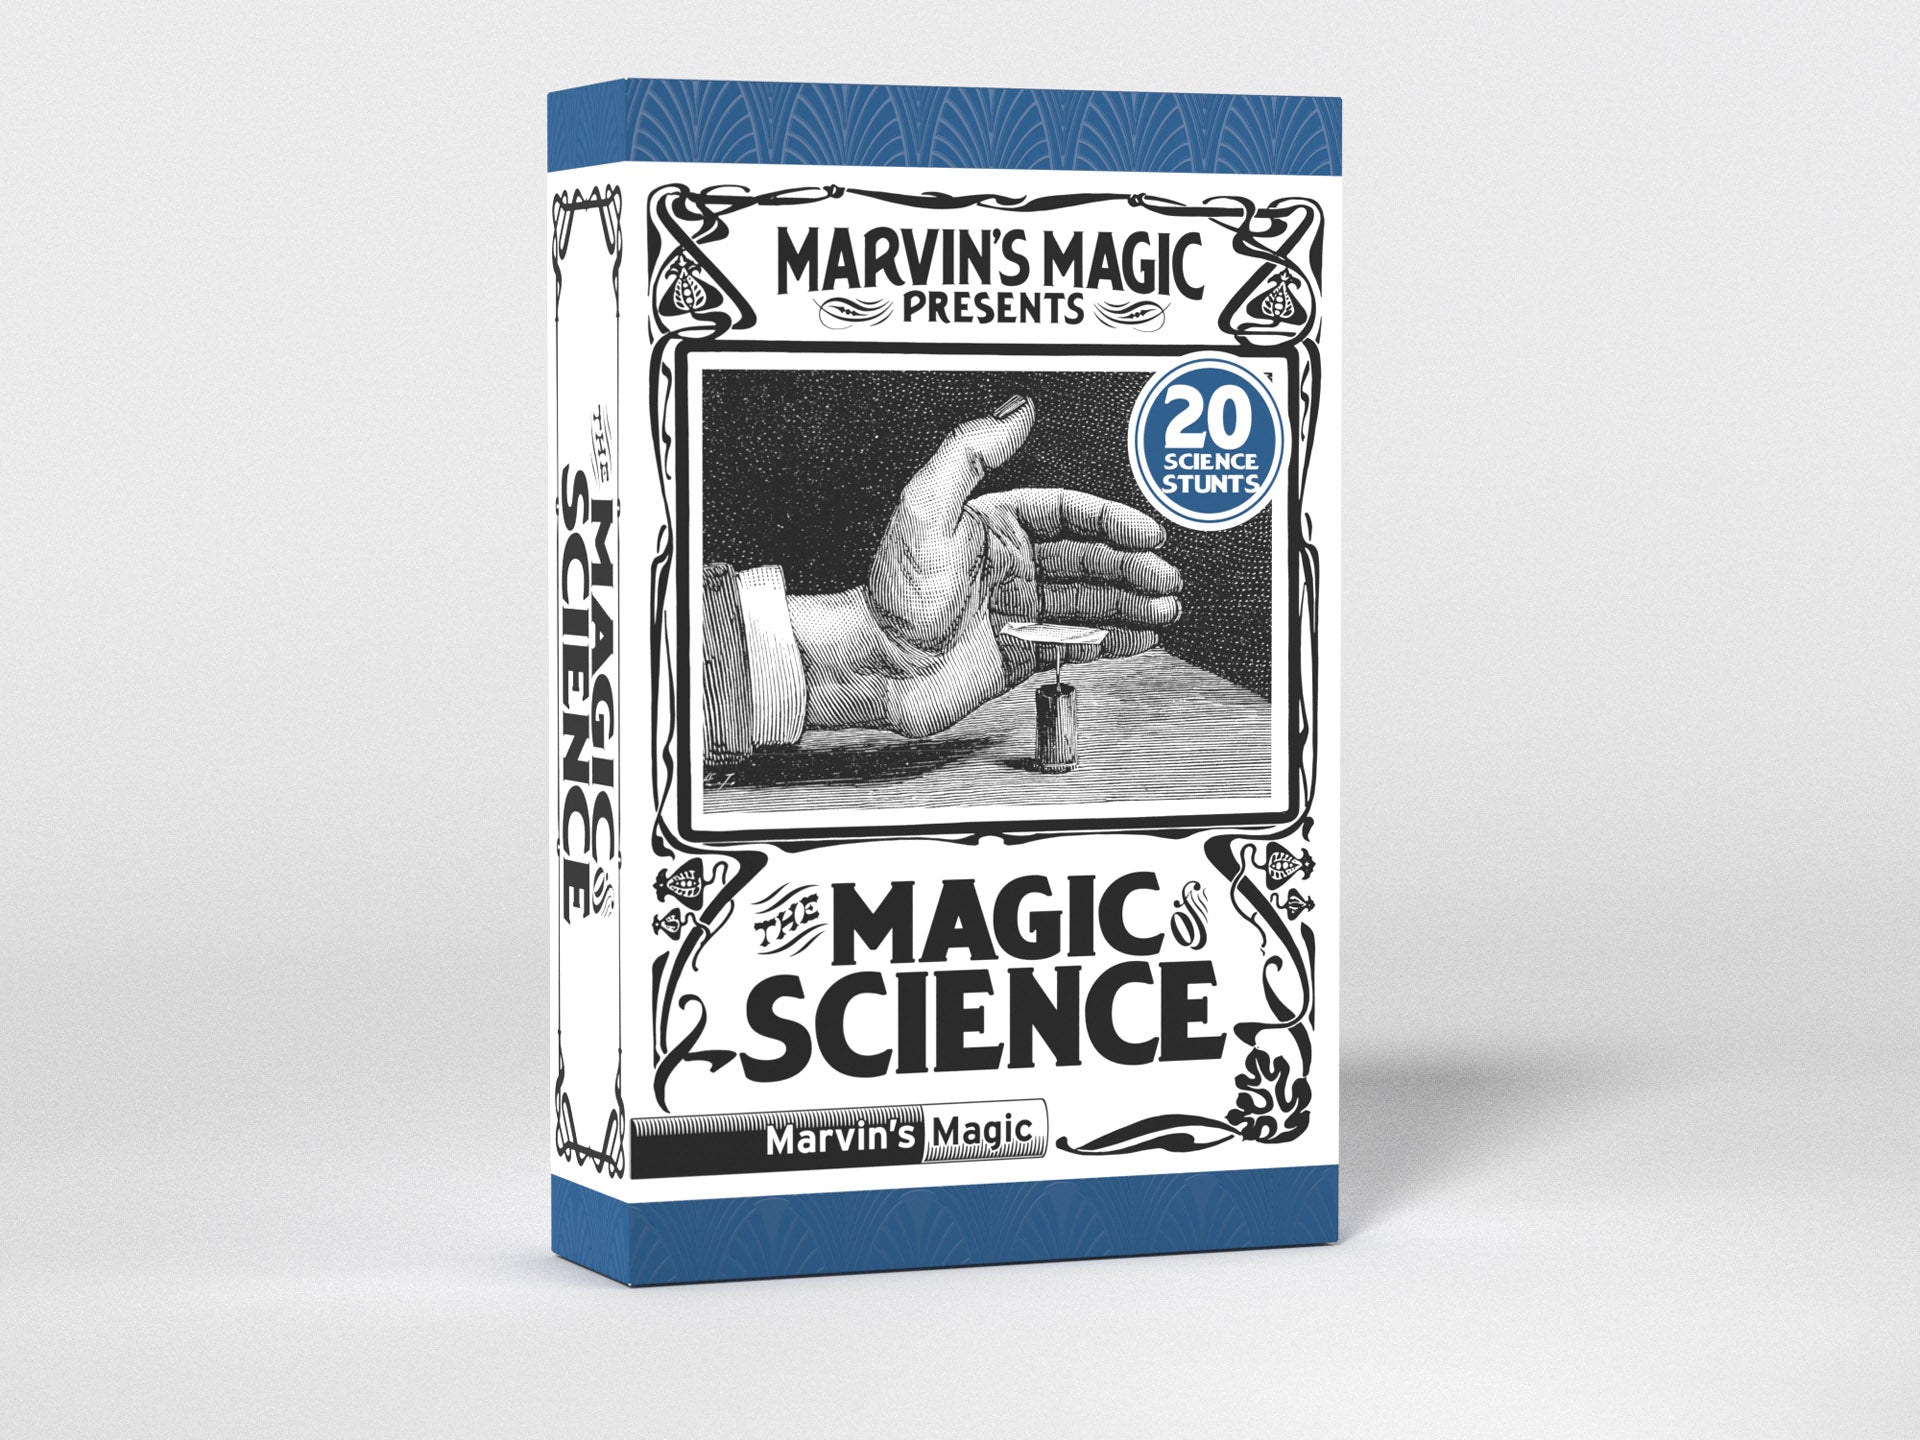 Marvin's Magic: The Magic of Science